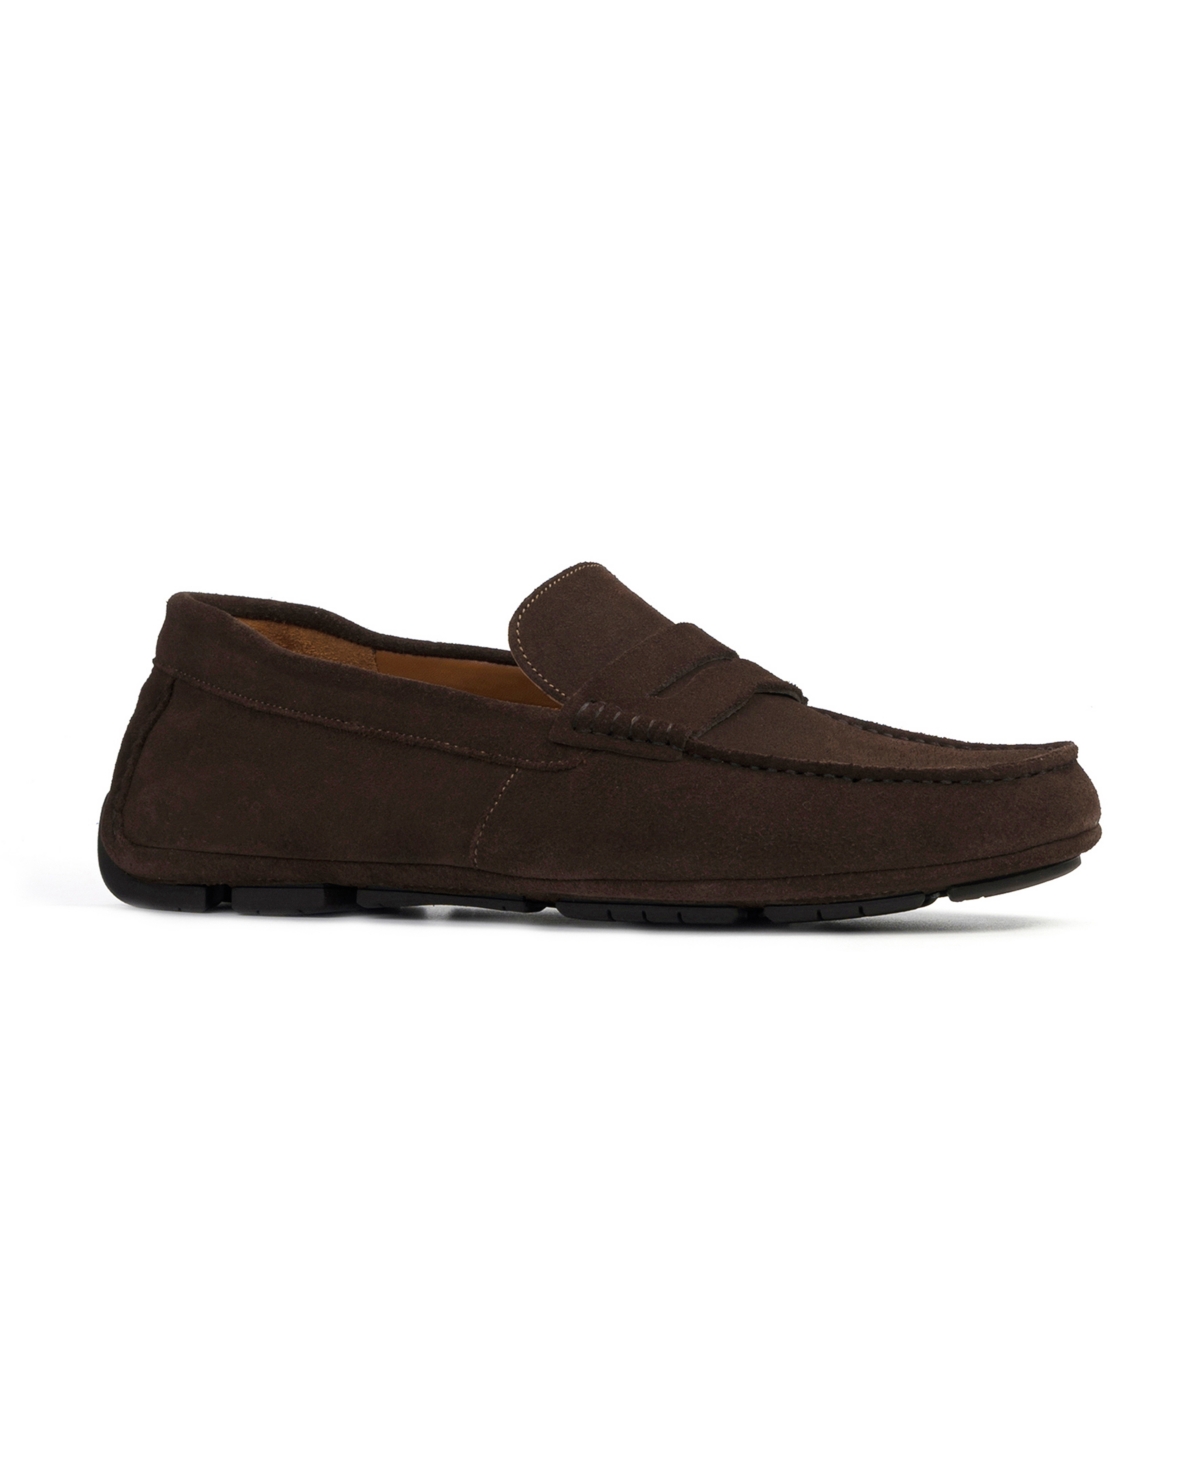 Men's Cruise Driver Slip-On Leather Loafers - Tan